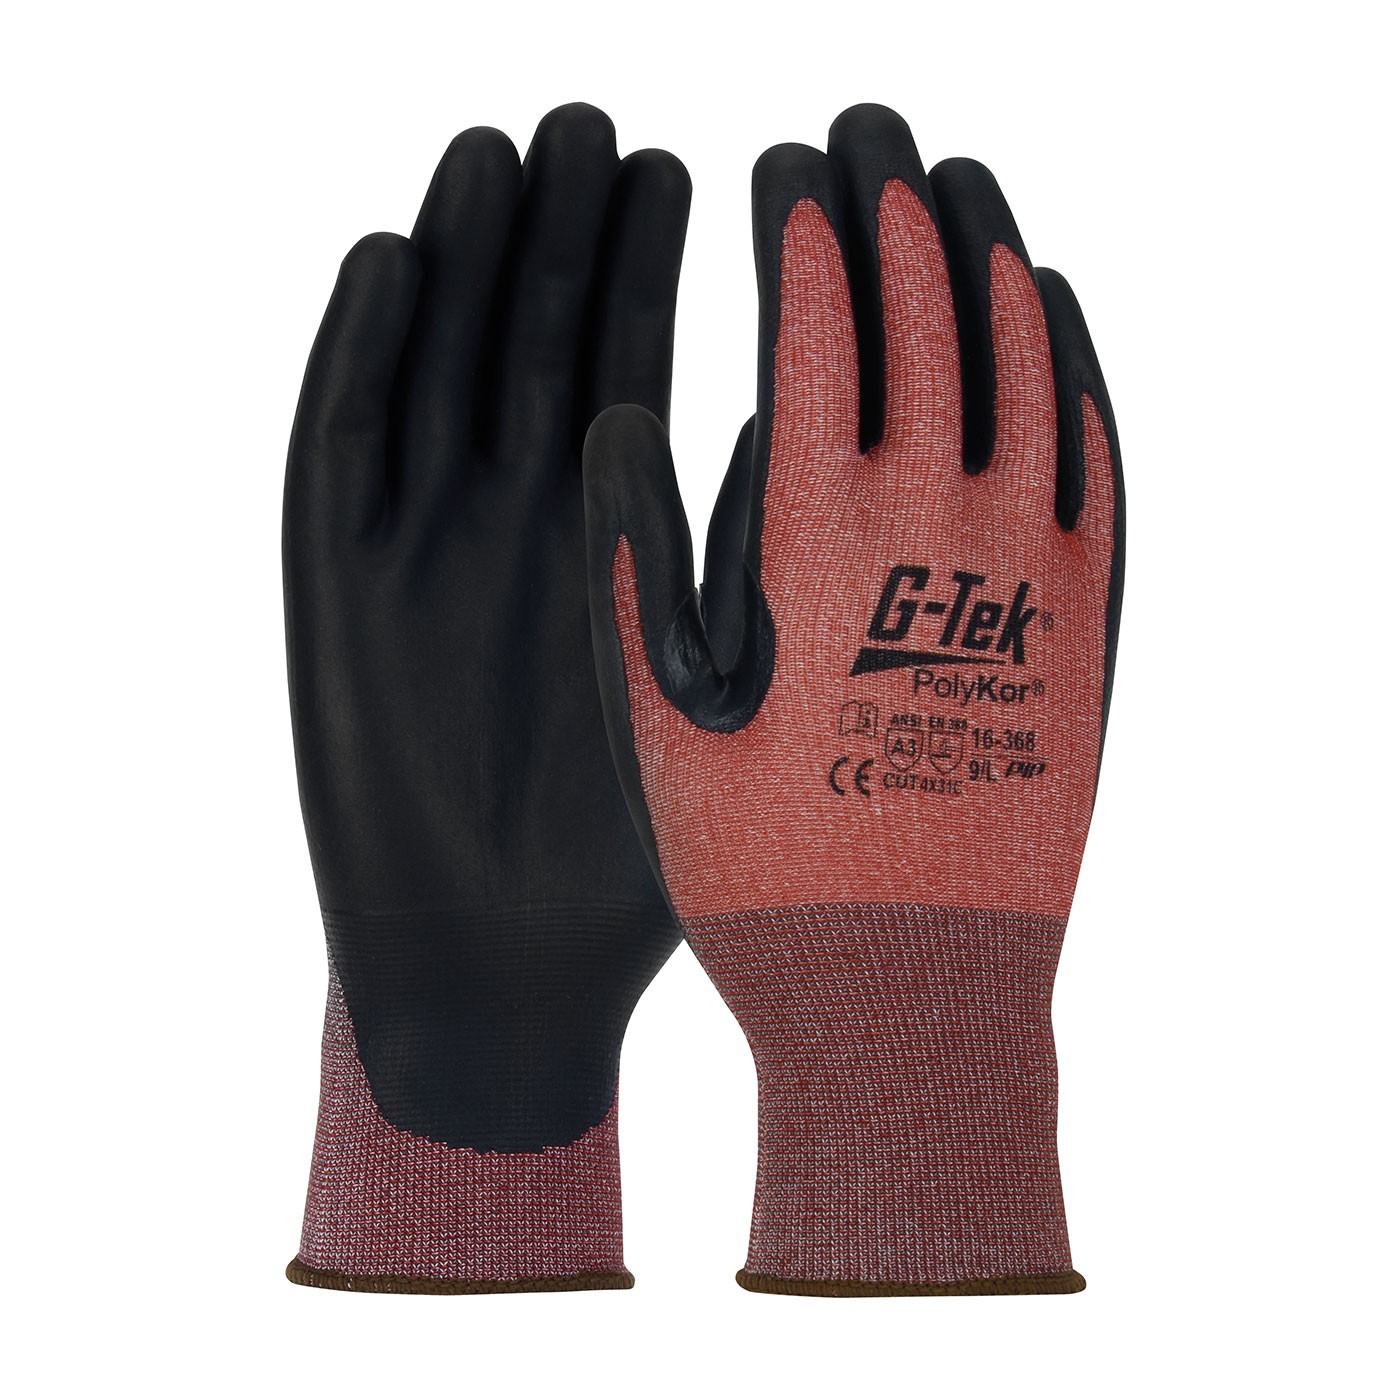 G-Tek® PolyKor® X7™ Seamless Knit PolyKor® X7™ Blended Glove with NeoFoam® Coated Palm & Fingers - Touchscreen Compatible  (#16-368)